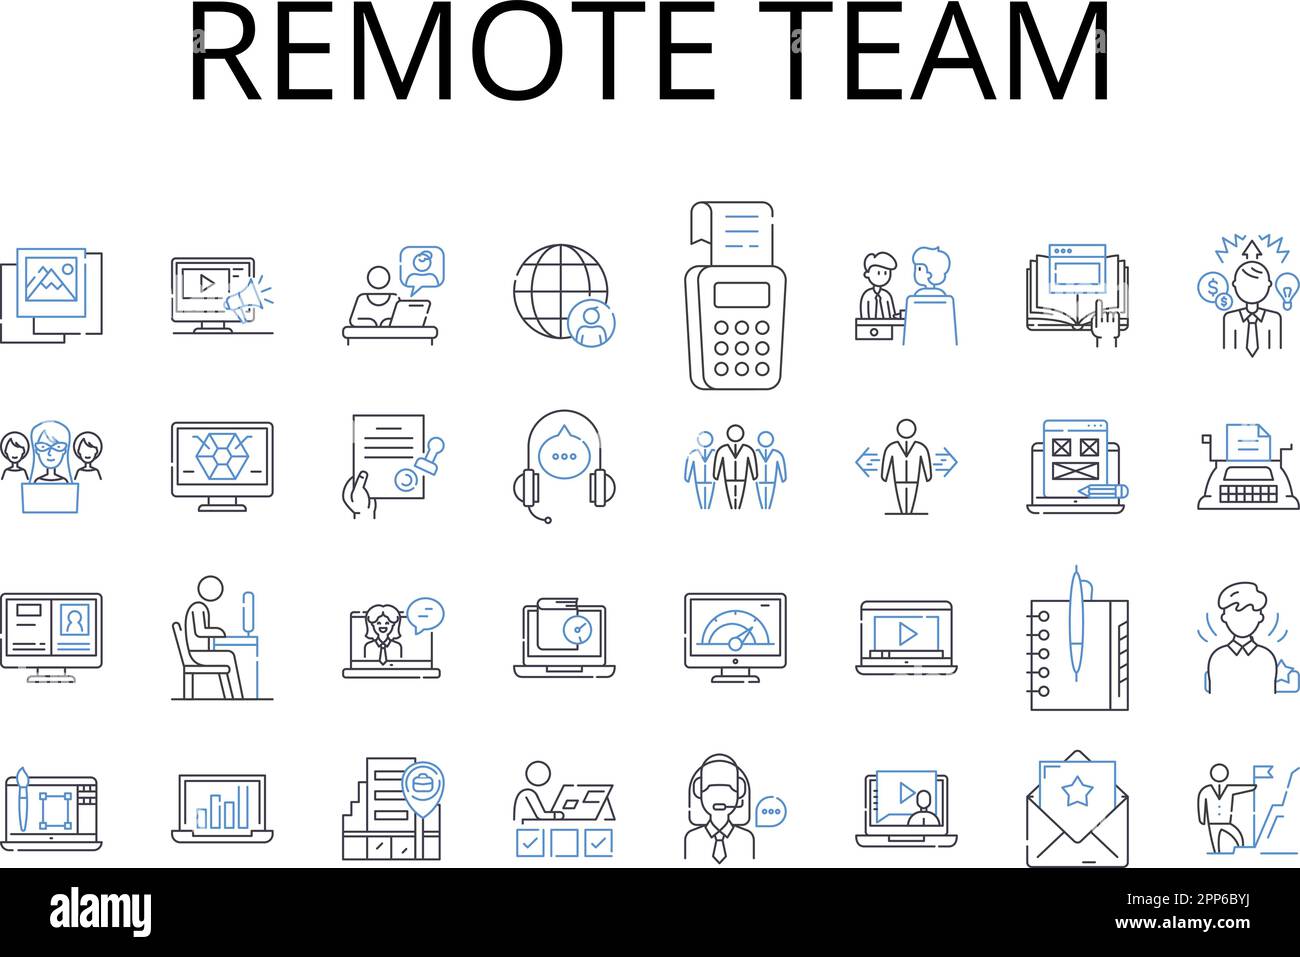 Remote team line icons collection. Virtual staff, Distant group, Off-site team, Far-flung crew, Online personnel, Geographically dispersed unit Stock Vector